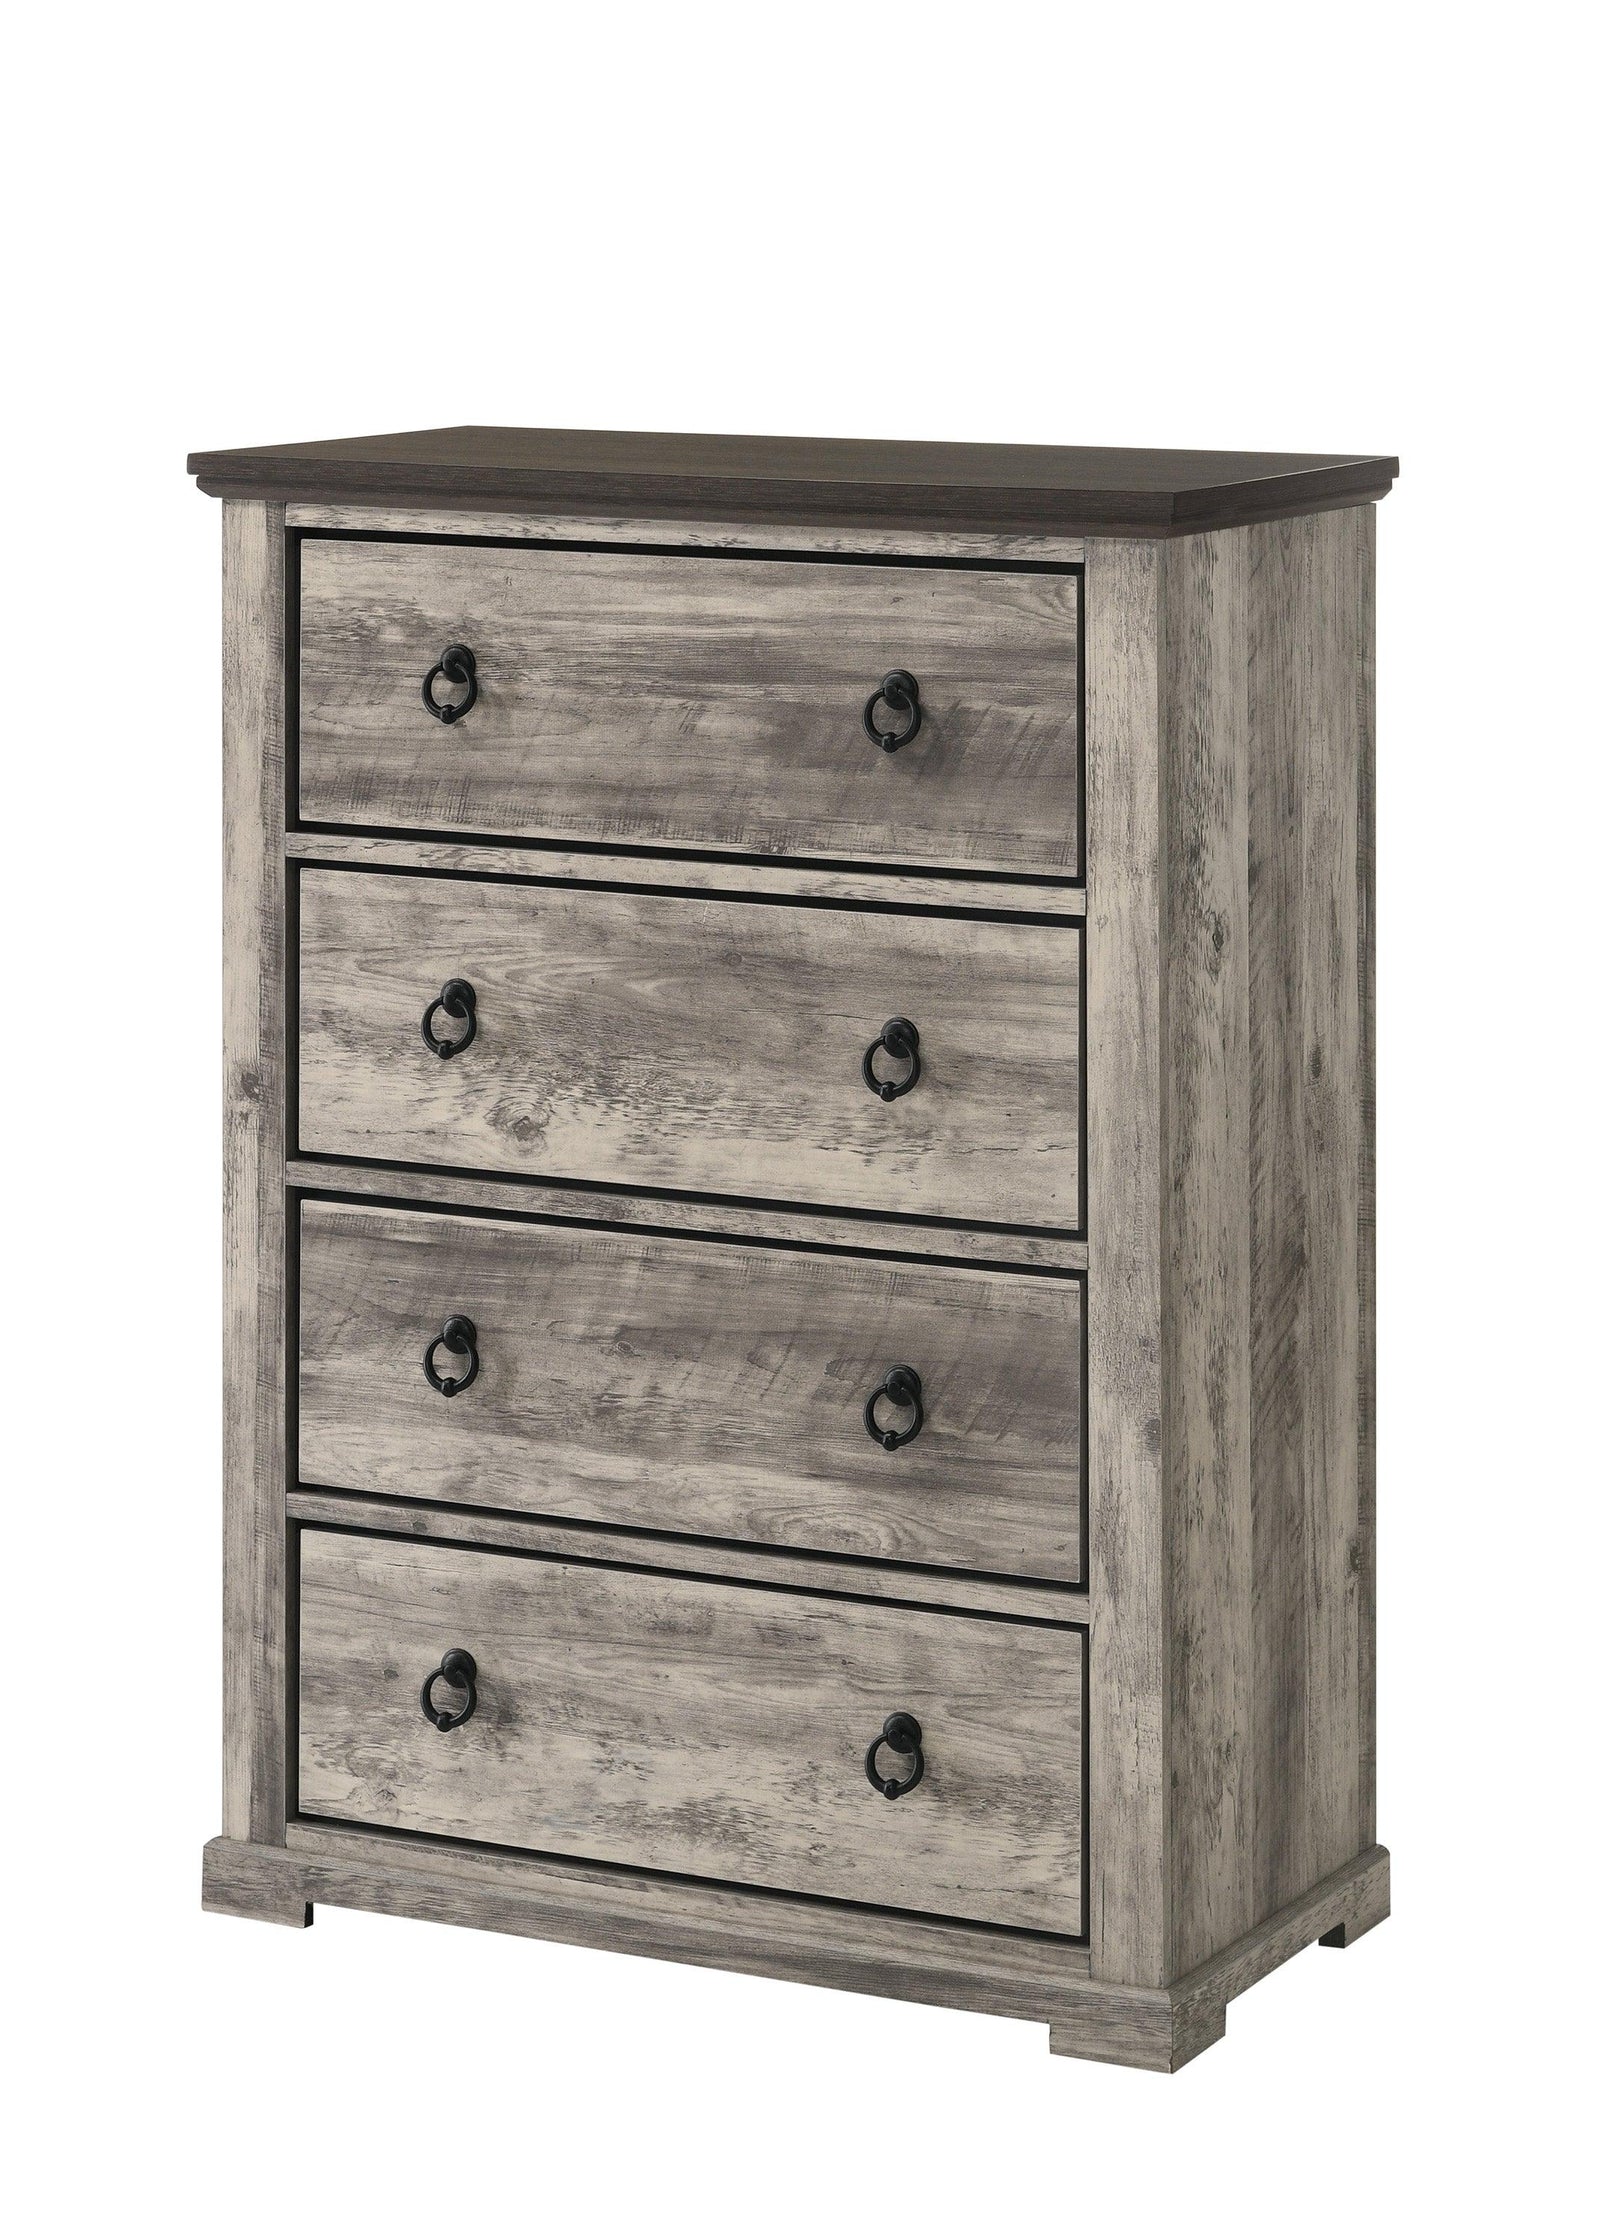 Ella-mae Gray Modern Contemporary Solid Wood And Veneers 5-Drawers Chest - Ella Furniture